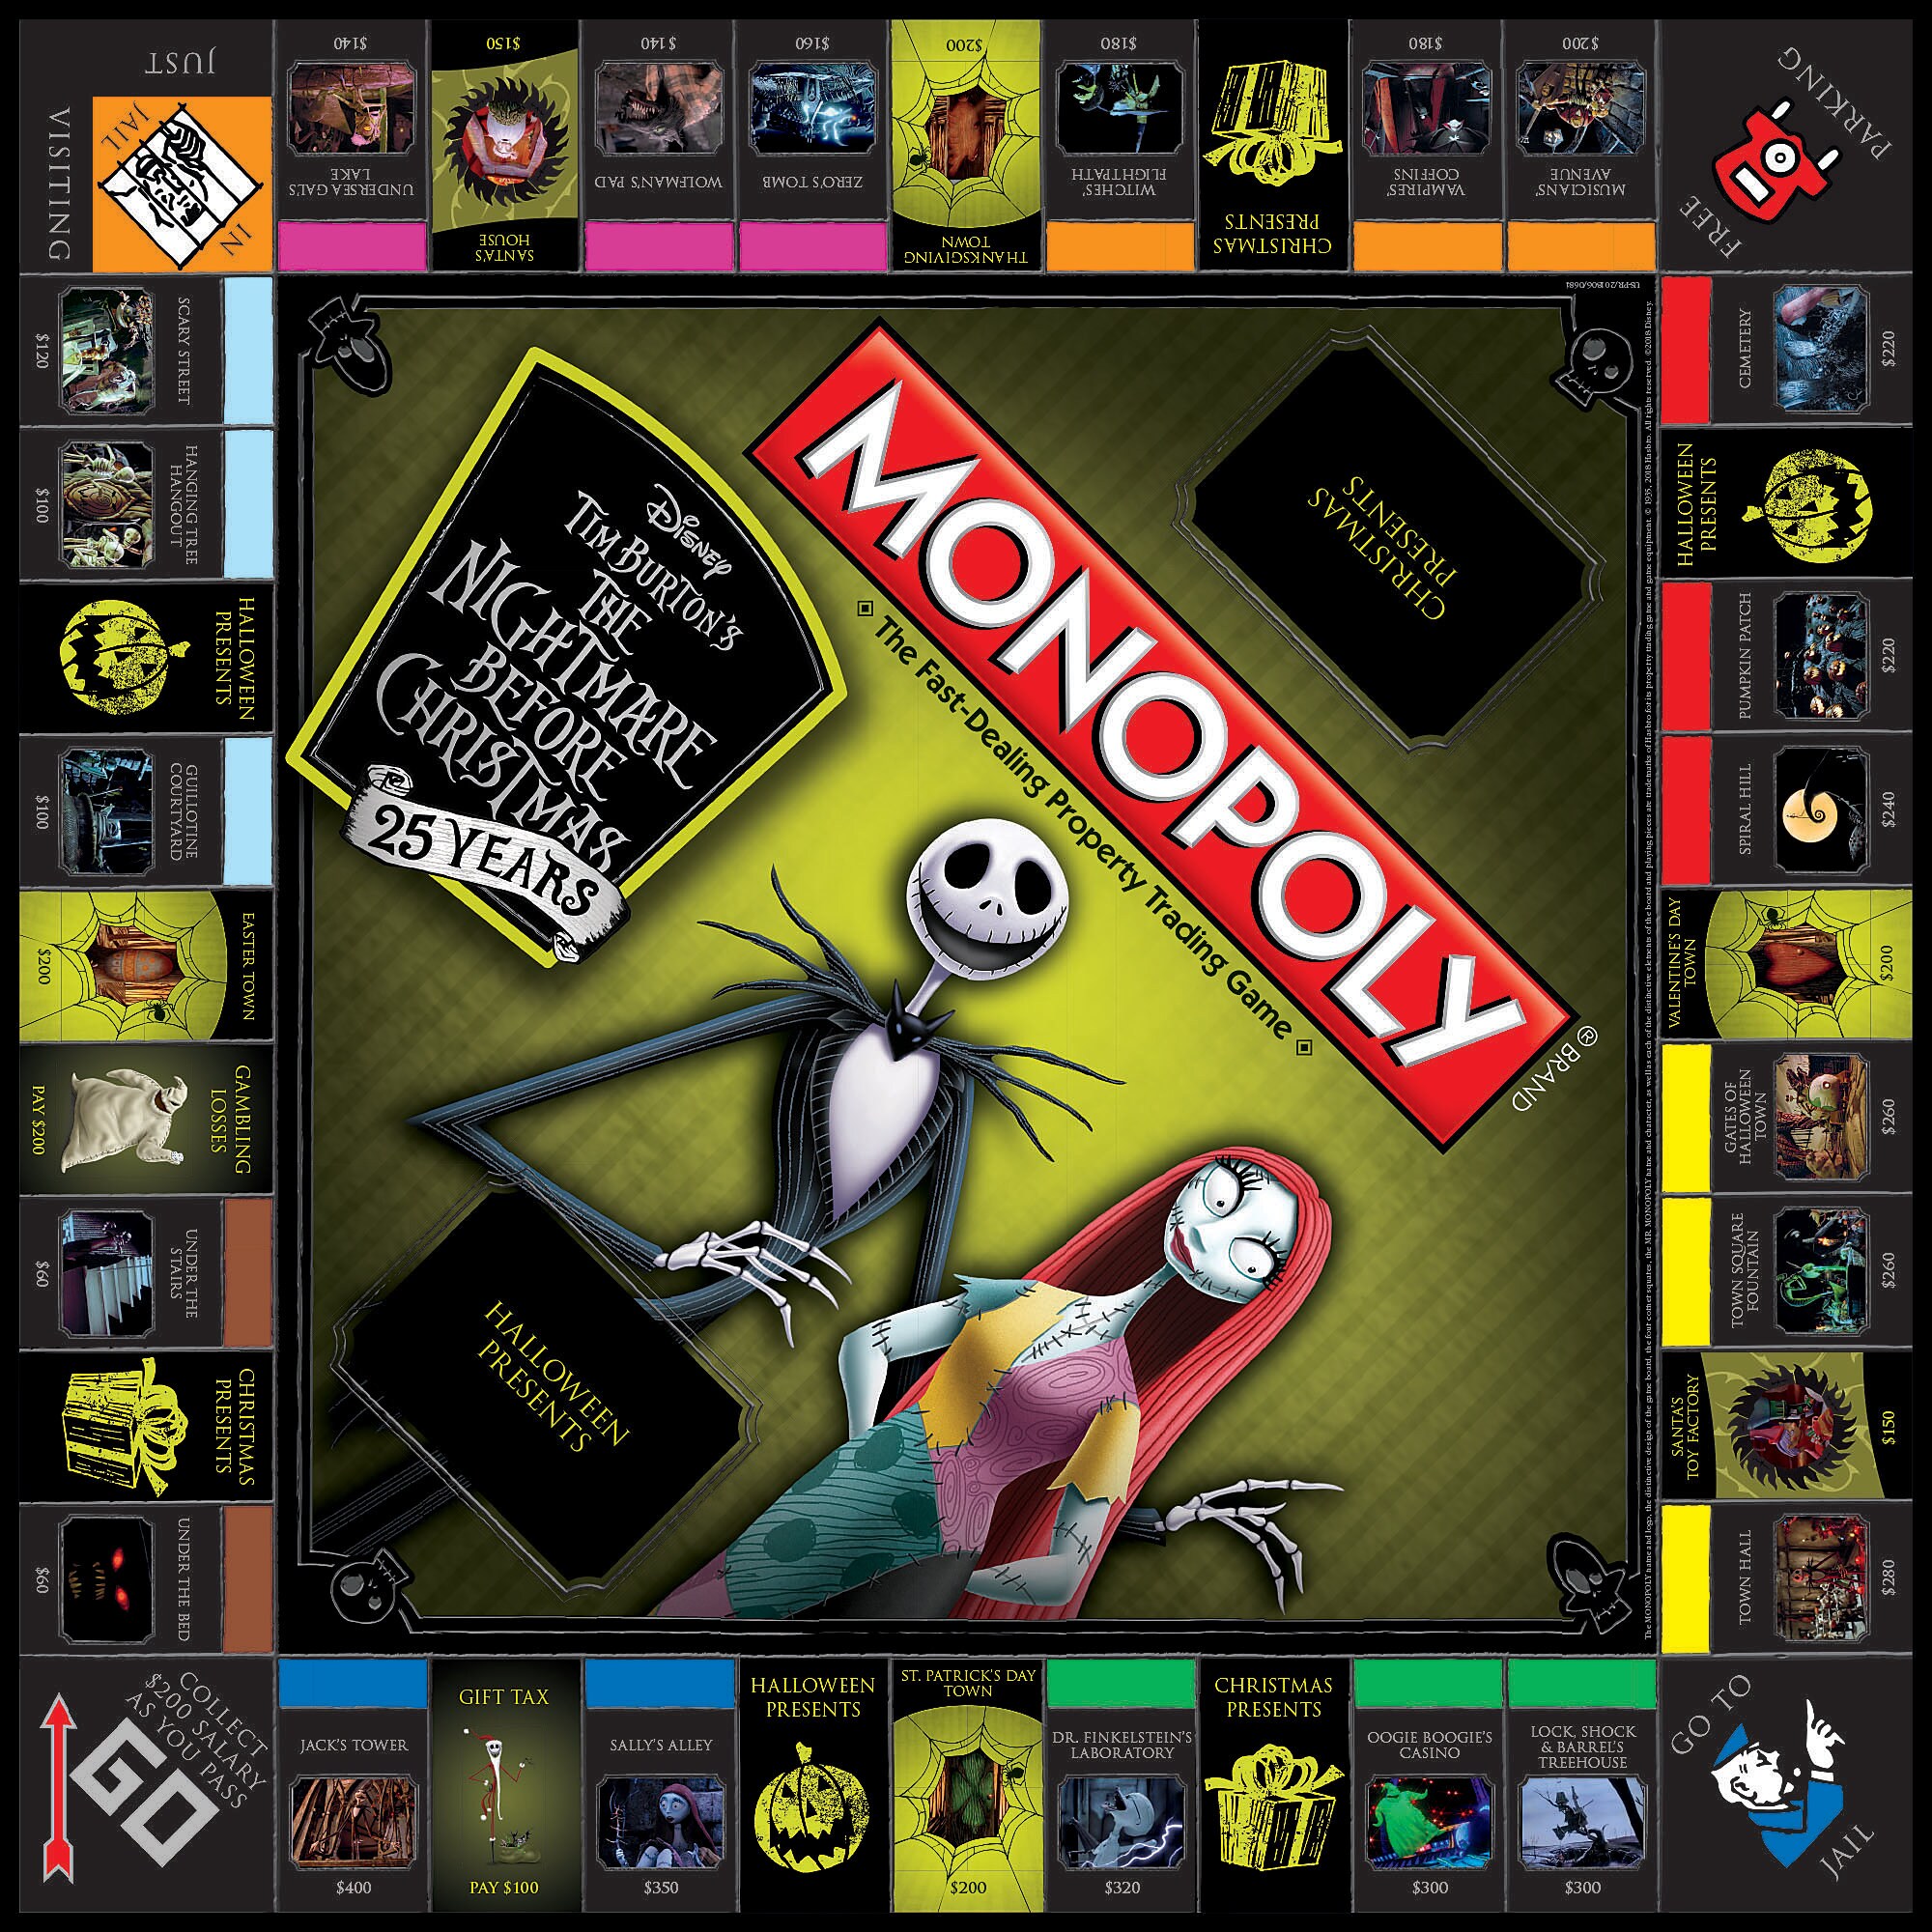 The Nightmare Before Christmas 25th Anniversary Monopoly Game